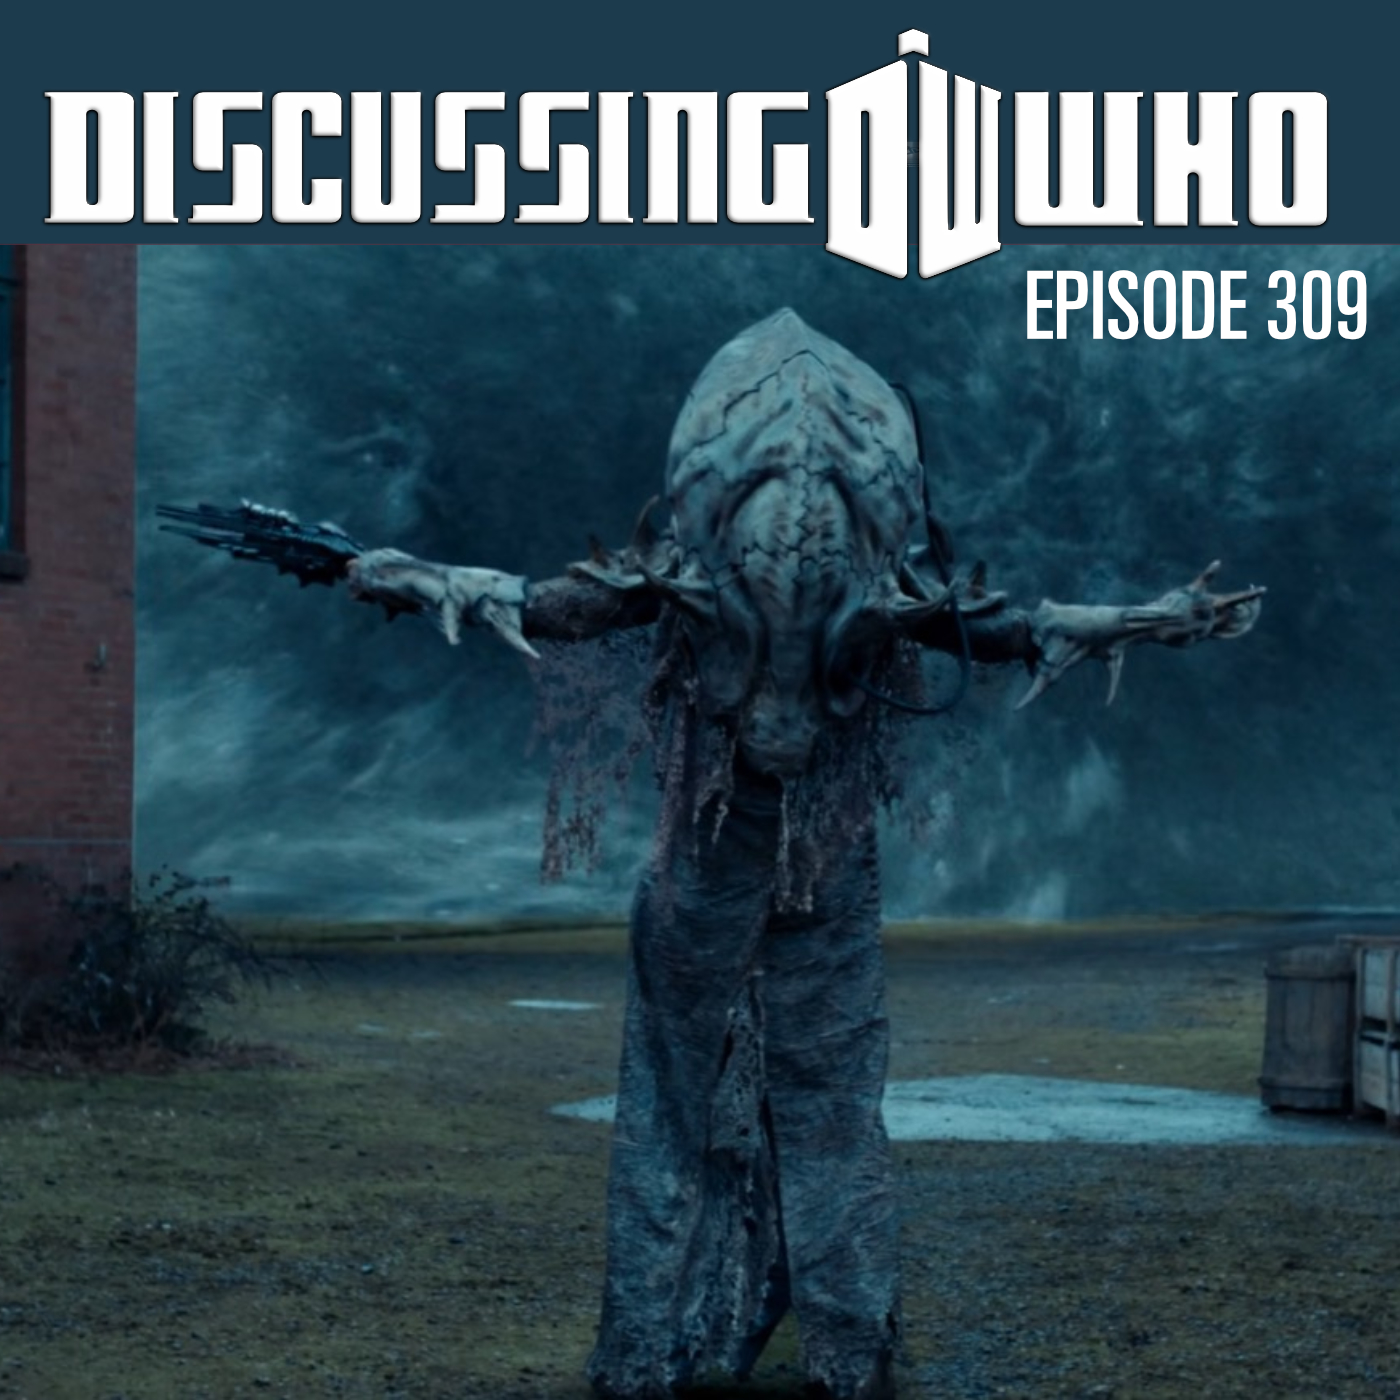 Episode 309: Review of Before the Flood, Doctor Who Series 9 Episode 4